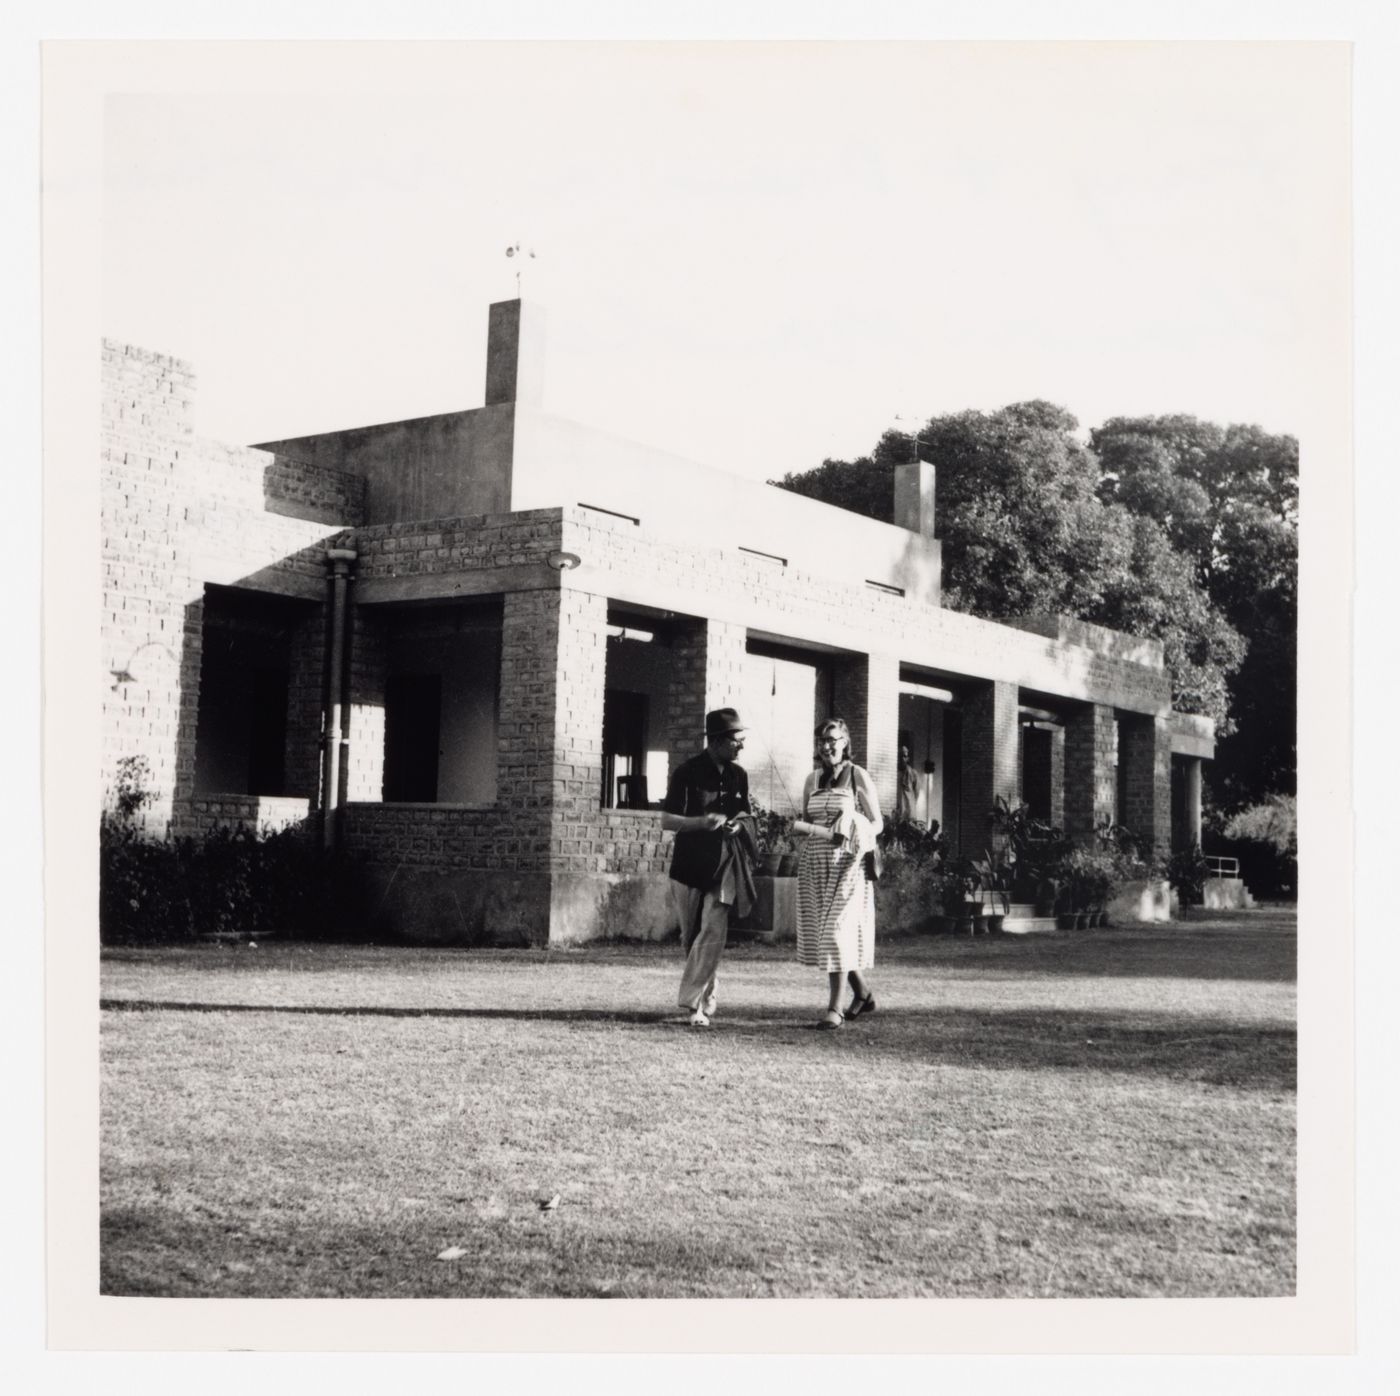 Maxwell Fry and Jane Drew in front of a house in Chandigarh, India